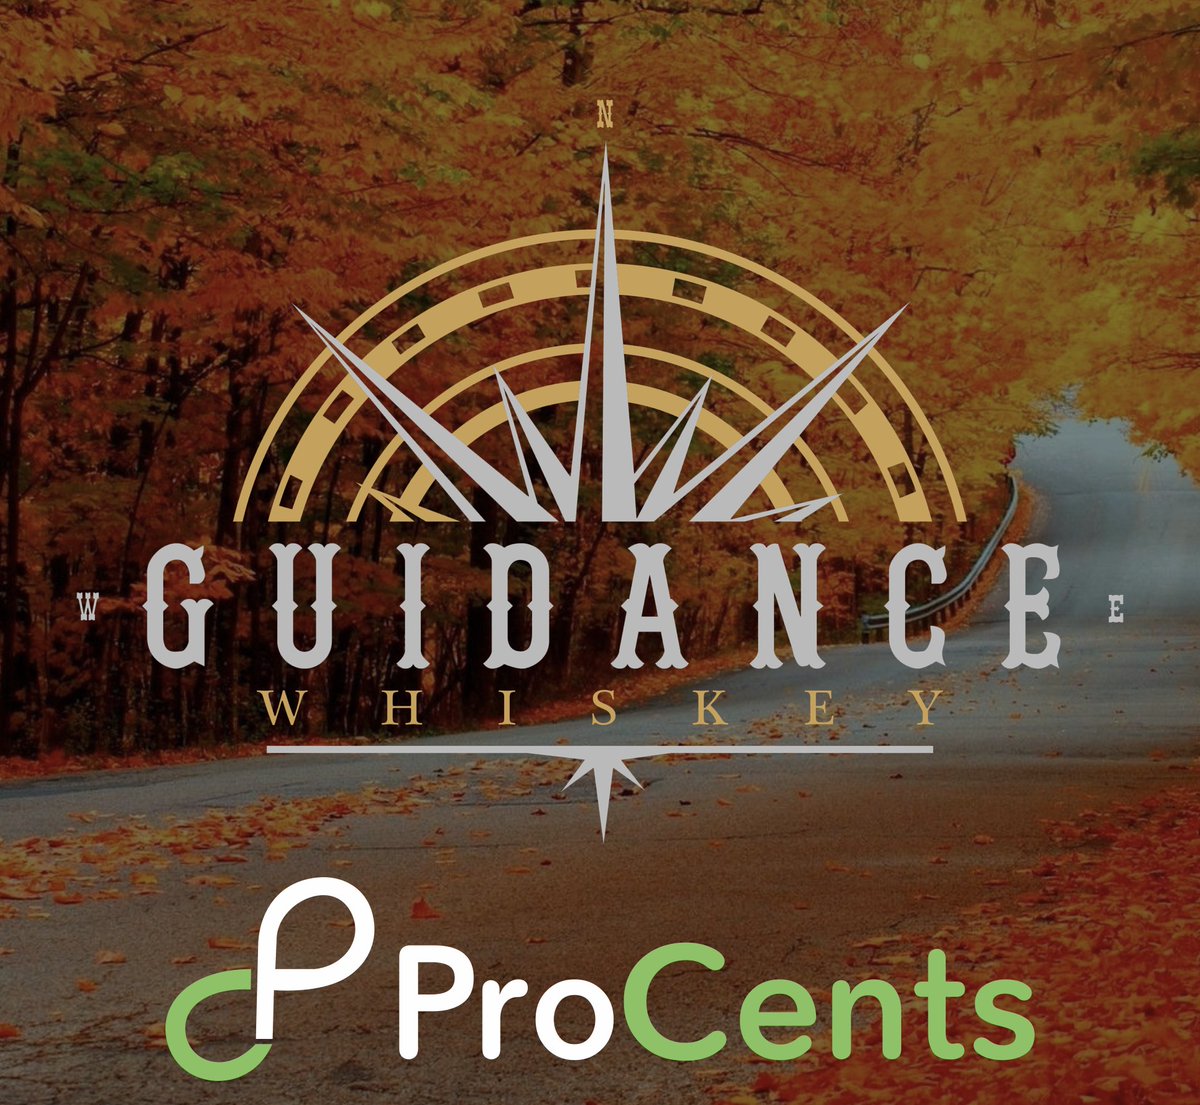 🥃 Savor the Connection with Guidance Whiskey! 🥃

ProCents is all about building connections that warm the heart. That's why we invite you to stay connected with our fantastic partners at Guidance Whiskey.
#ProCentsConnections #GuidanceWhiskey #StayConnected